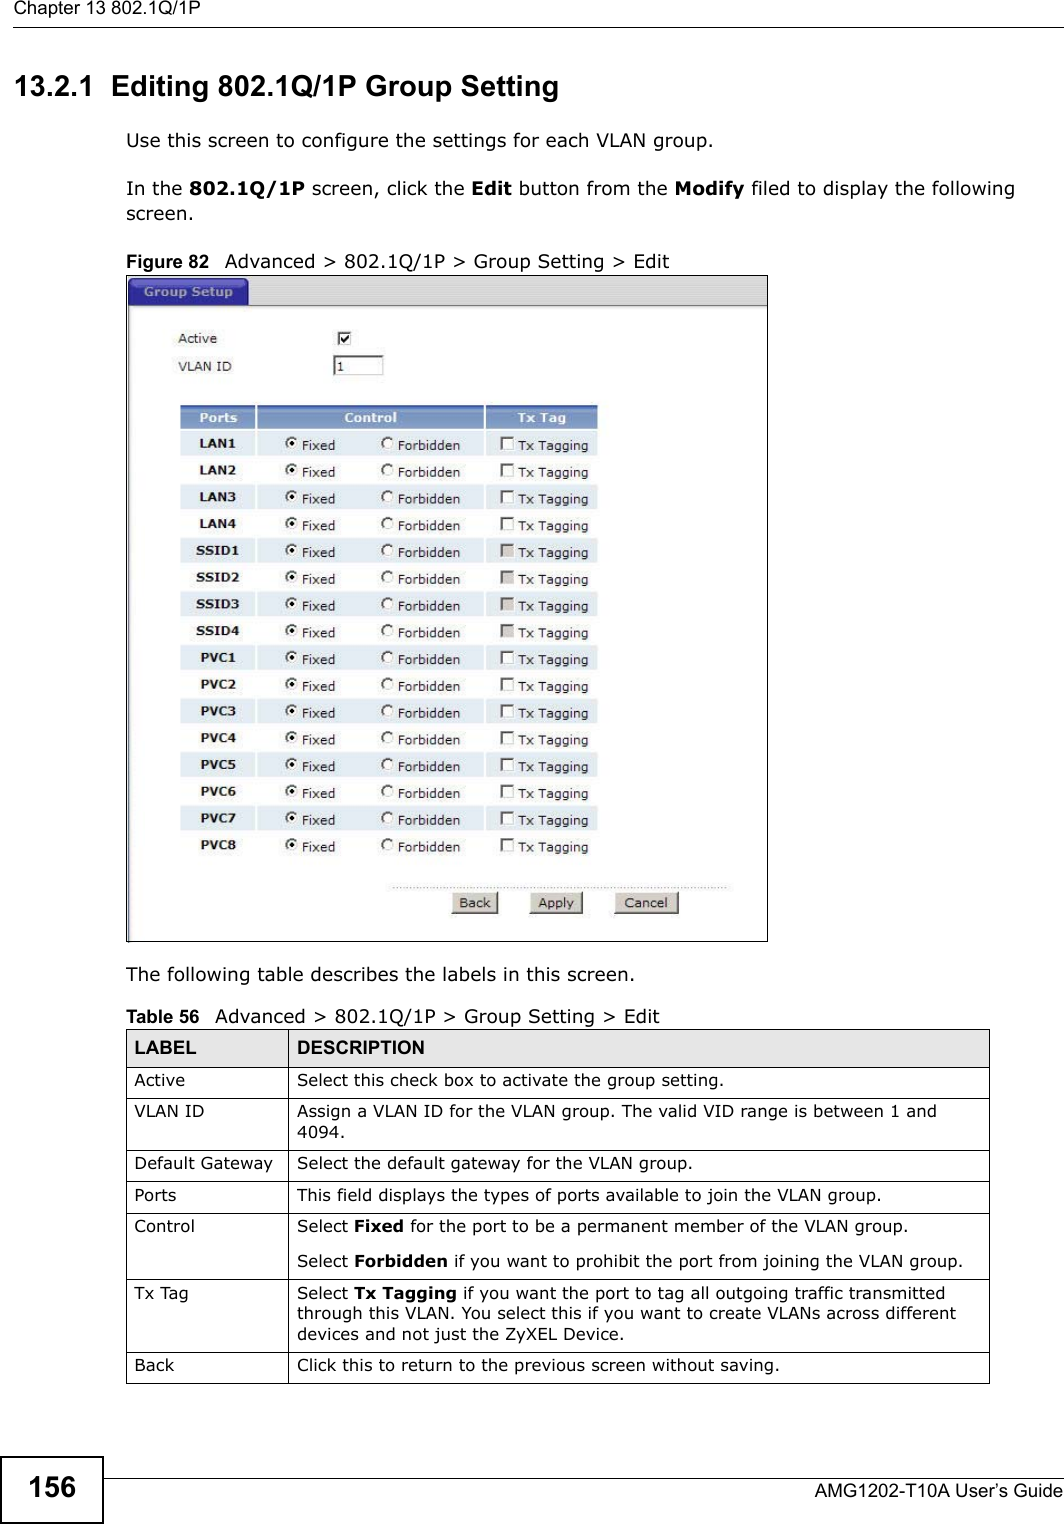 Chapter 13 802.1Q/1PAMG1202-T10A User’s Guide15613.2.1  Editing 802.1Q/1P Group SettingUse this screen to configure the settings for each VLAN group.In the 802.1Q/1P screen, click the Edit button from the Modify filed to display the following screen.Figure 82   Advanced &gt; 802.1Q/1P &gt; Group Setting &gt; EditThe following table describes the labels in this screen.  Table 56   Advanced &gt; 802.1Q/1P &gt; Group Setting &gt; EditLABEL DESCRIPTIONActive Select this check box to activate the group setting.VLAN ID Assign a VLAN ID for the VLAN group. The valid VID range is between 1 and 4094.Default Gateway Select the default gateway for the VLAN group.Ports This field displays the types of ports available to join the VLAN group.Control Select Fixed for the port to be a permanent member of the VLAN group.Select Forbidden if you want to prohibit the port from joining the VLAN group.Tx Tag Select Tx Tagging if you want the port to tag all outgoing traffic transmitted through this VLAN. You select this if you want to create VLANs across different devices and not just the ZyXEL Device.Back Click this to return to the previous screen without saving.